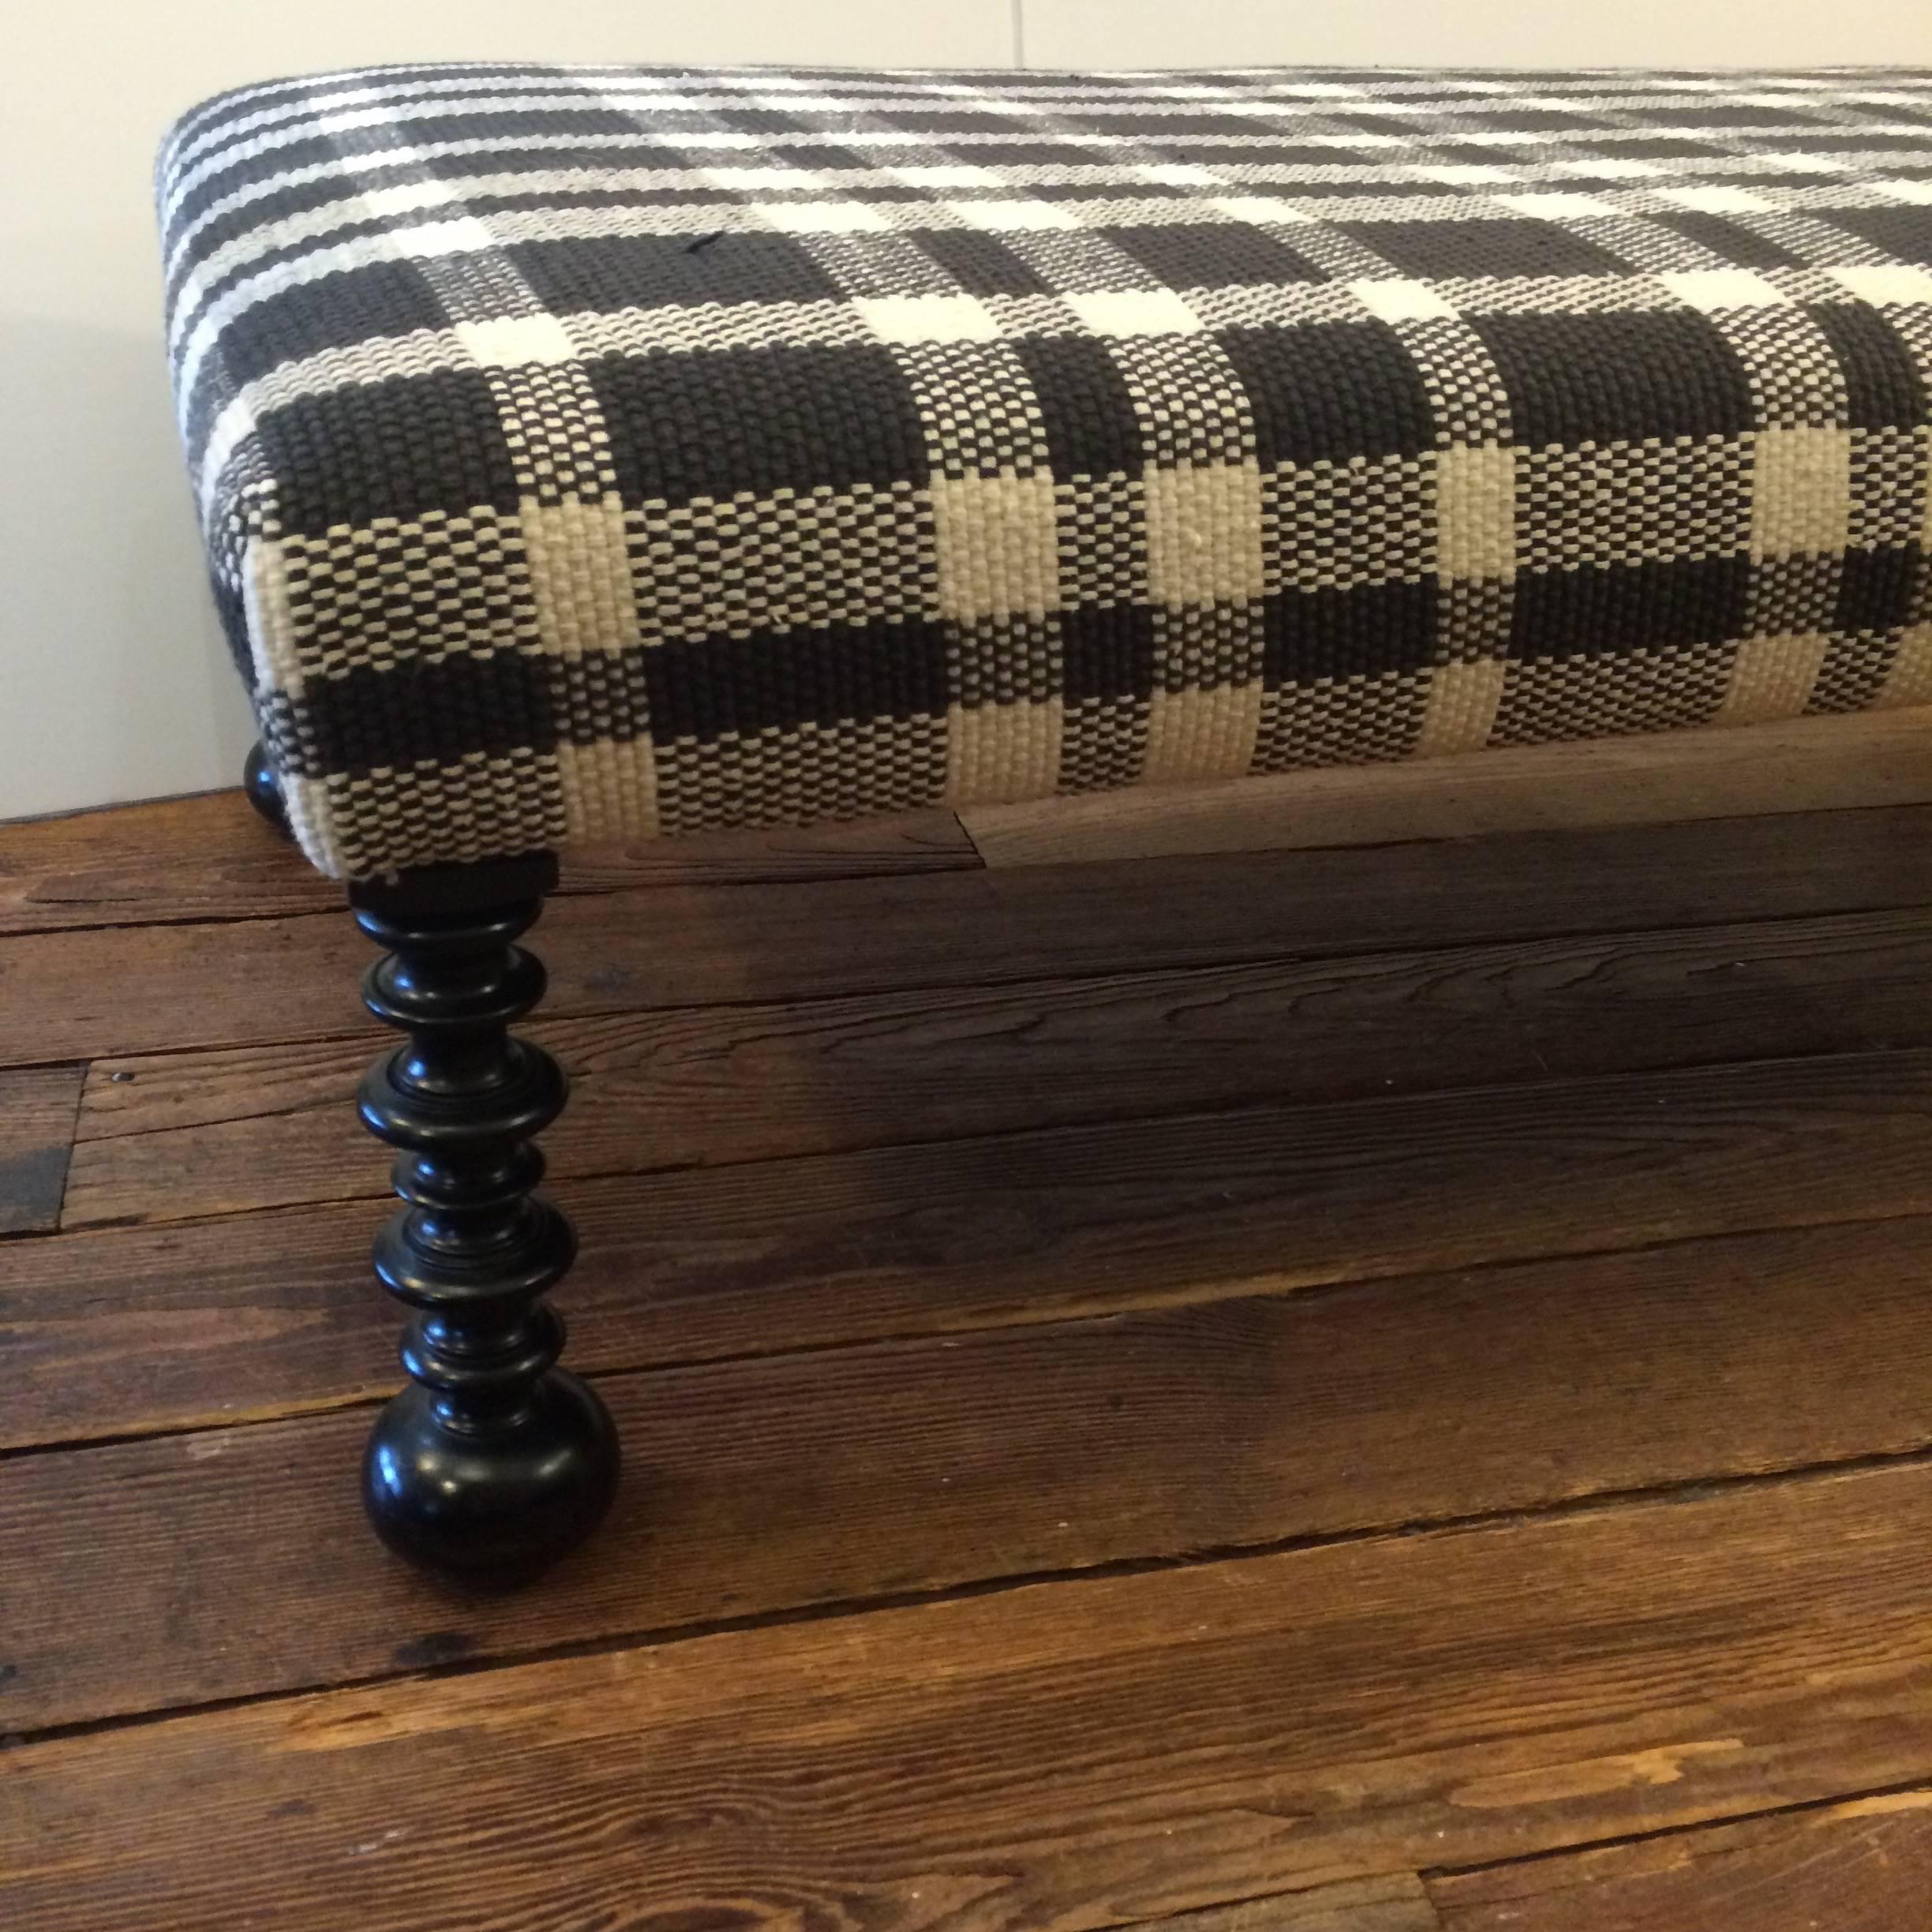 Handsome rectangular ottoman or coffee table with turned ebonized wood feet and upholstered in a striking Dhurrie black and white plaid. Perfect condition. About 10 years old.